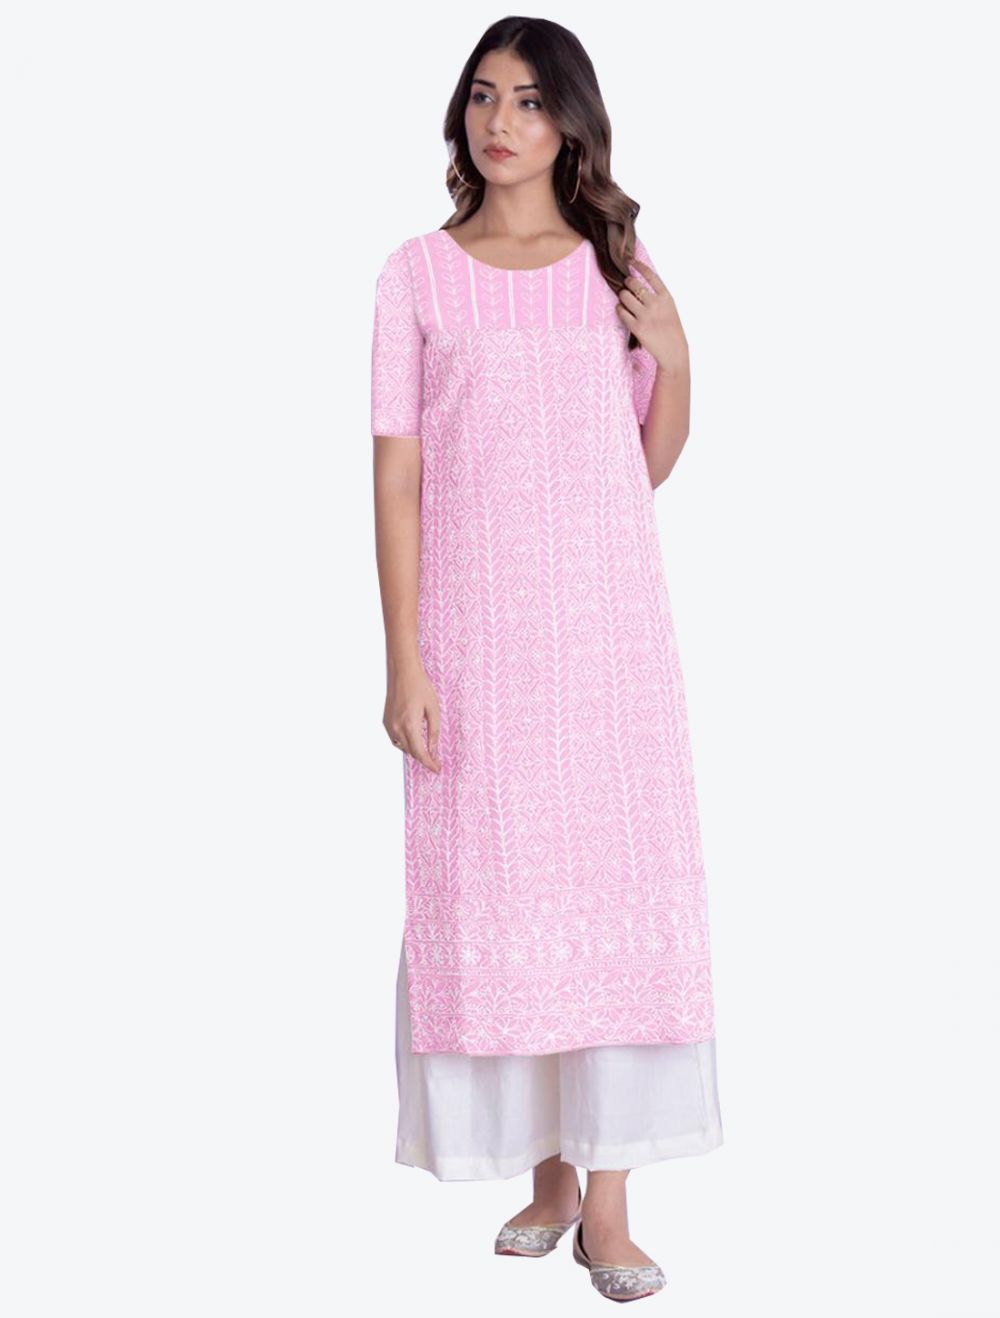 Buy Pink New Arrival Cotton Indian Kurti Tunic Online for Women in USA